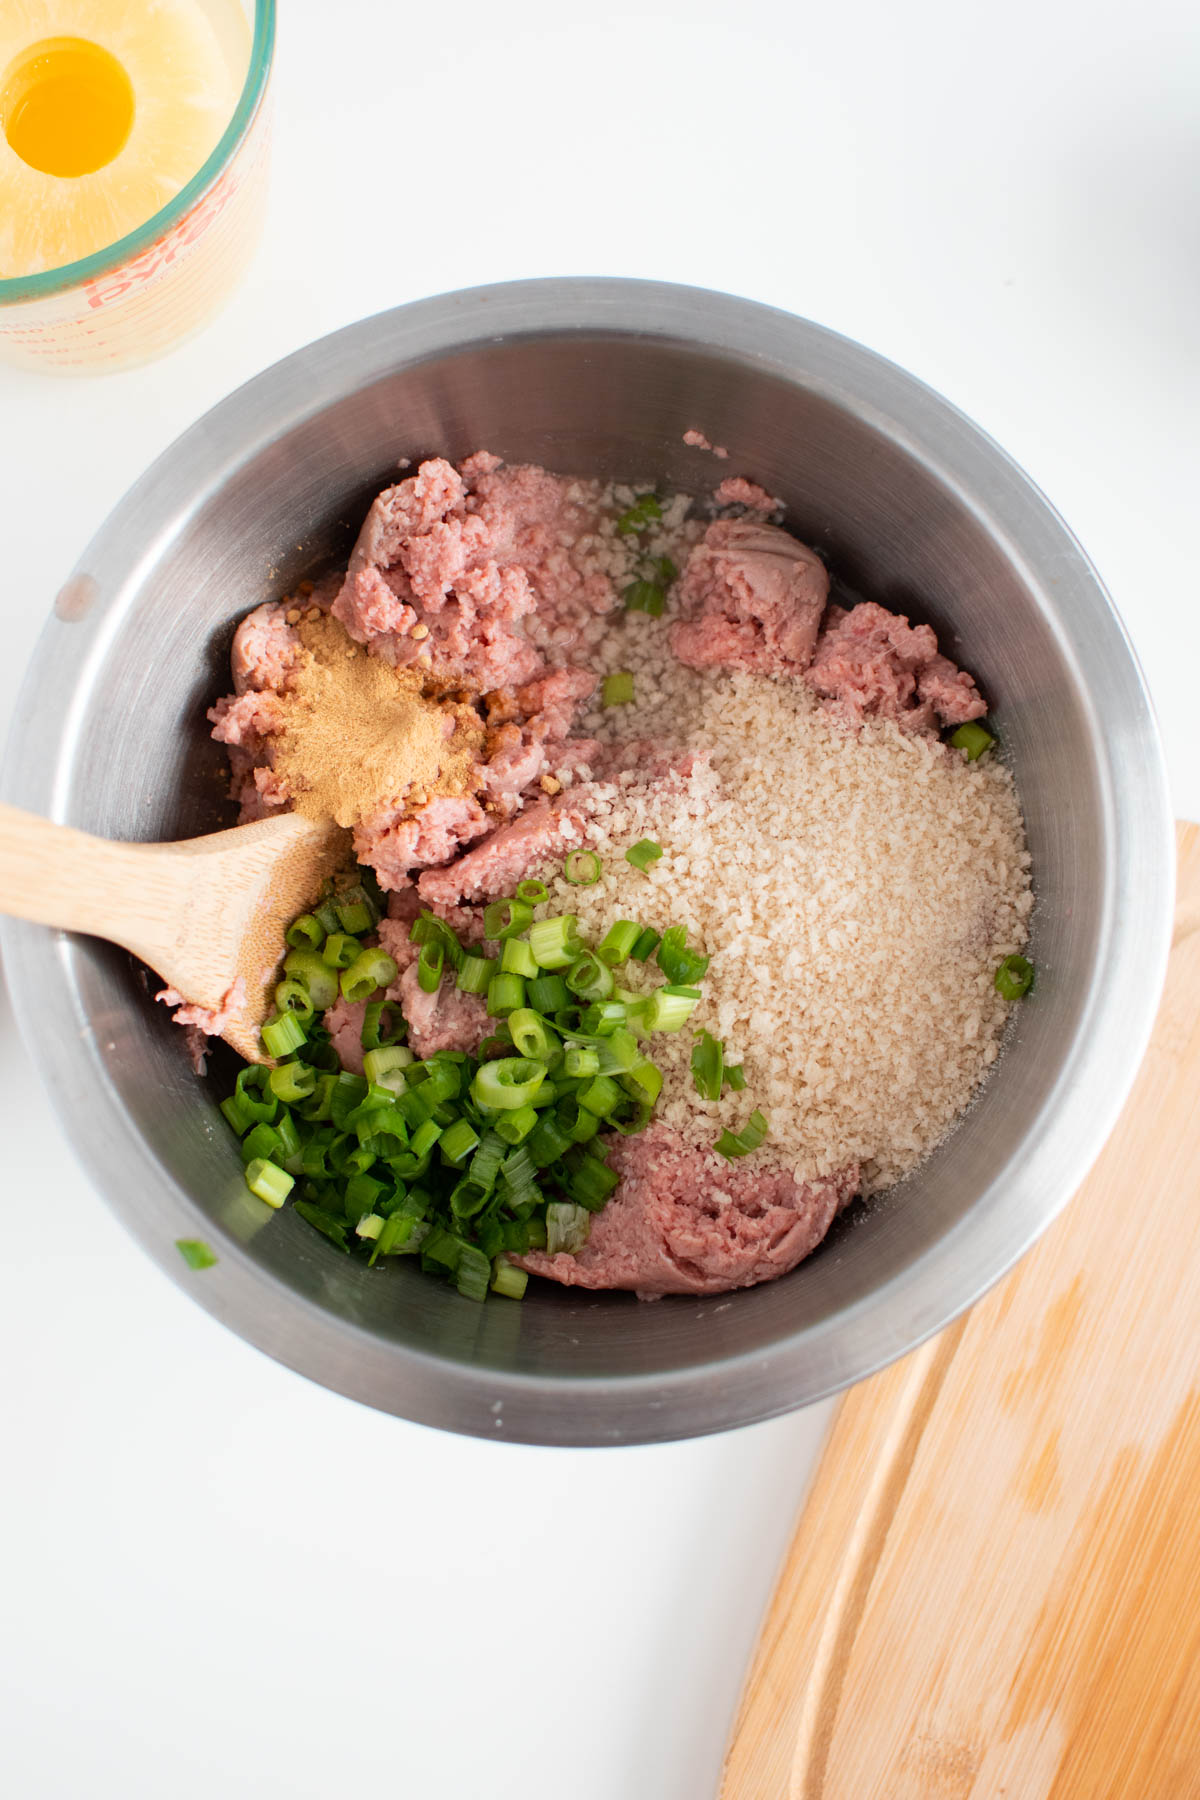 Raw ground turkey with green onion and breadcrumbs in metal mixing bowl.